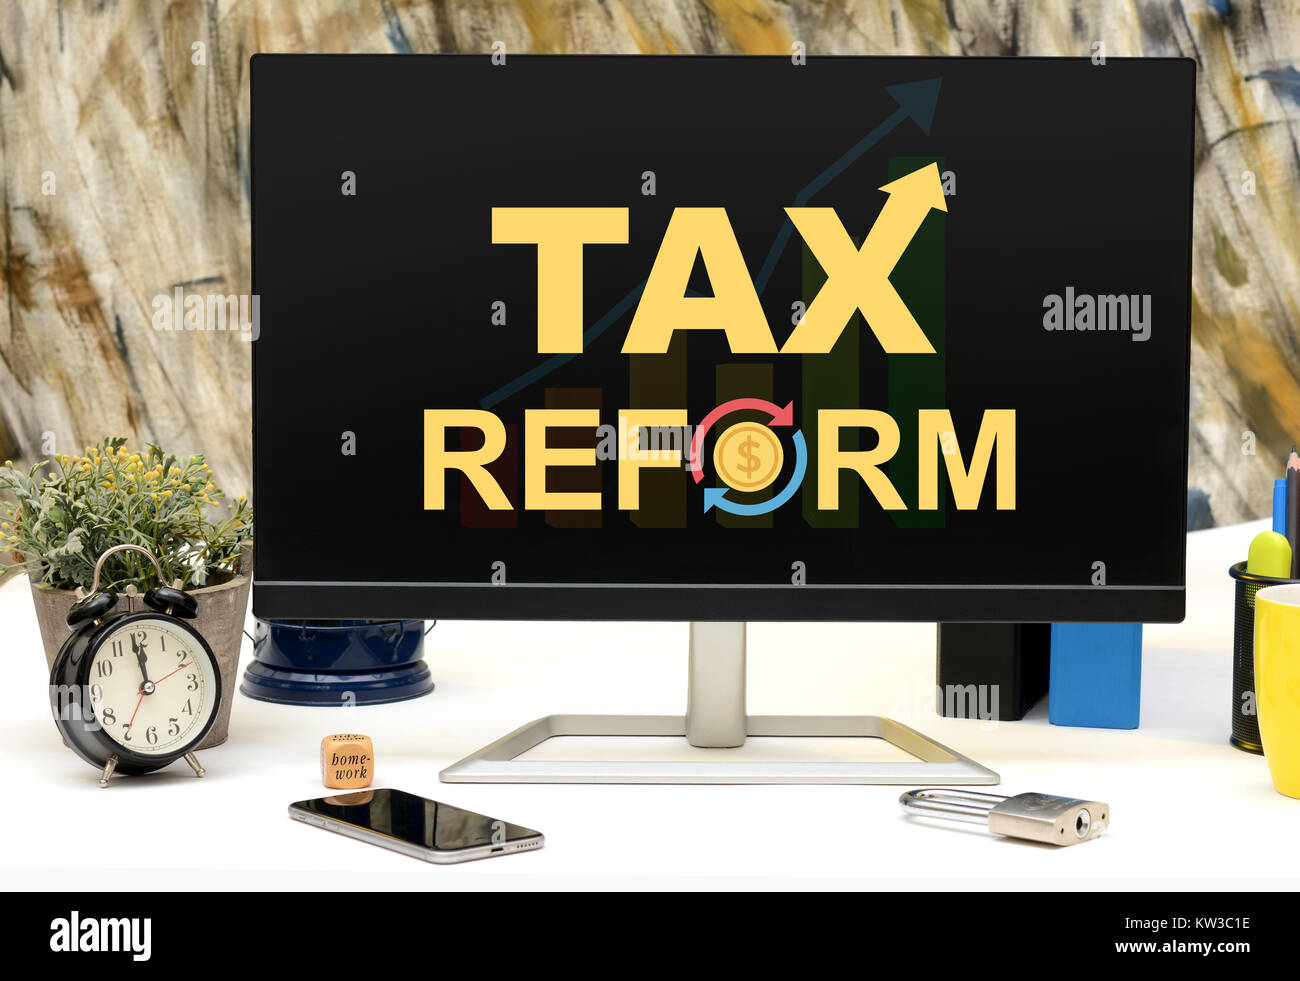 Tax Refors Word Design office table Monitor Display. Stock Photo